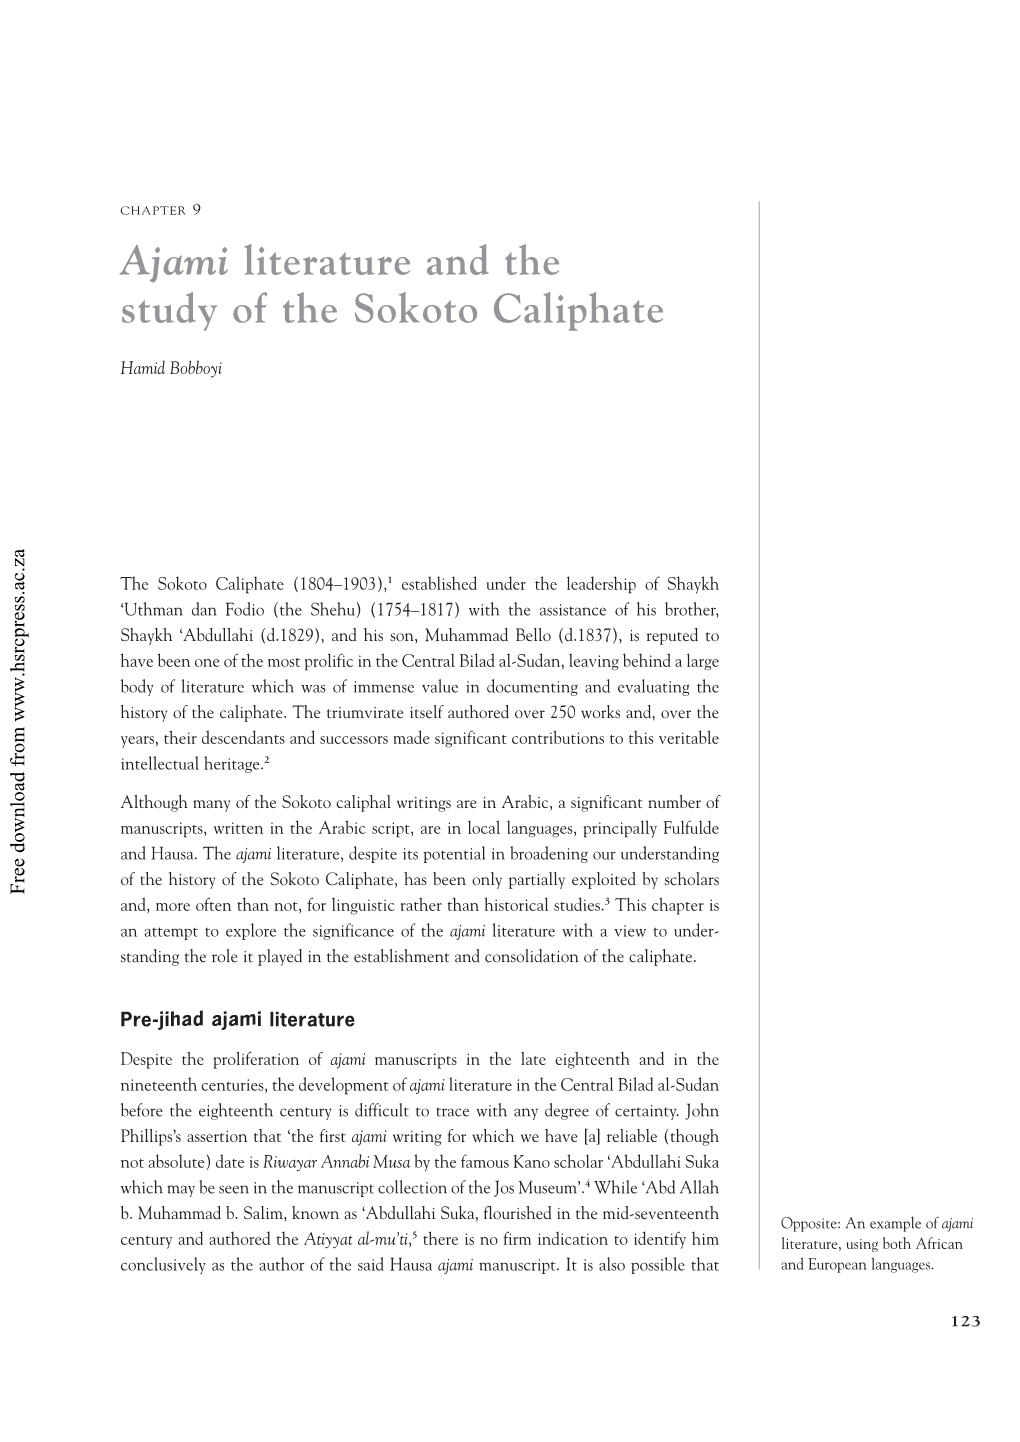 Ajami Literature and the Study of the Sokoto Caliphate